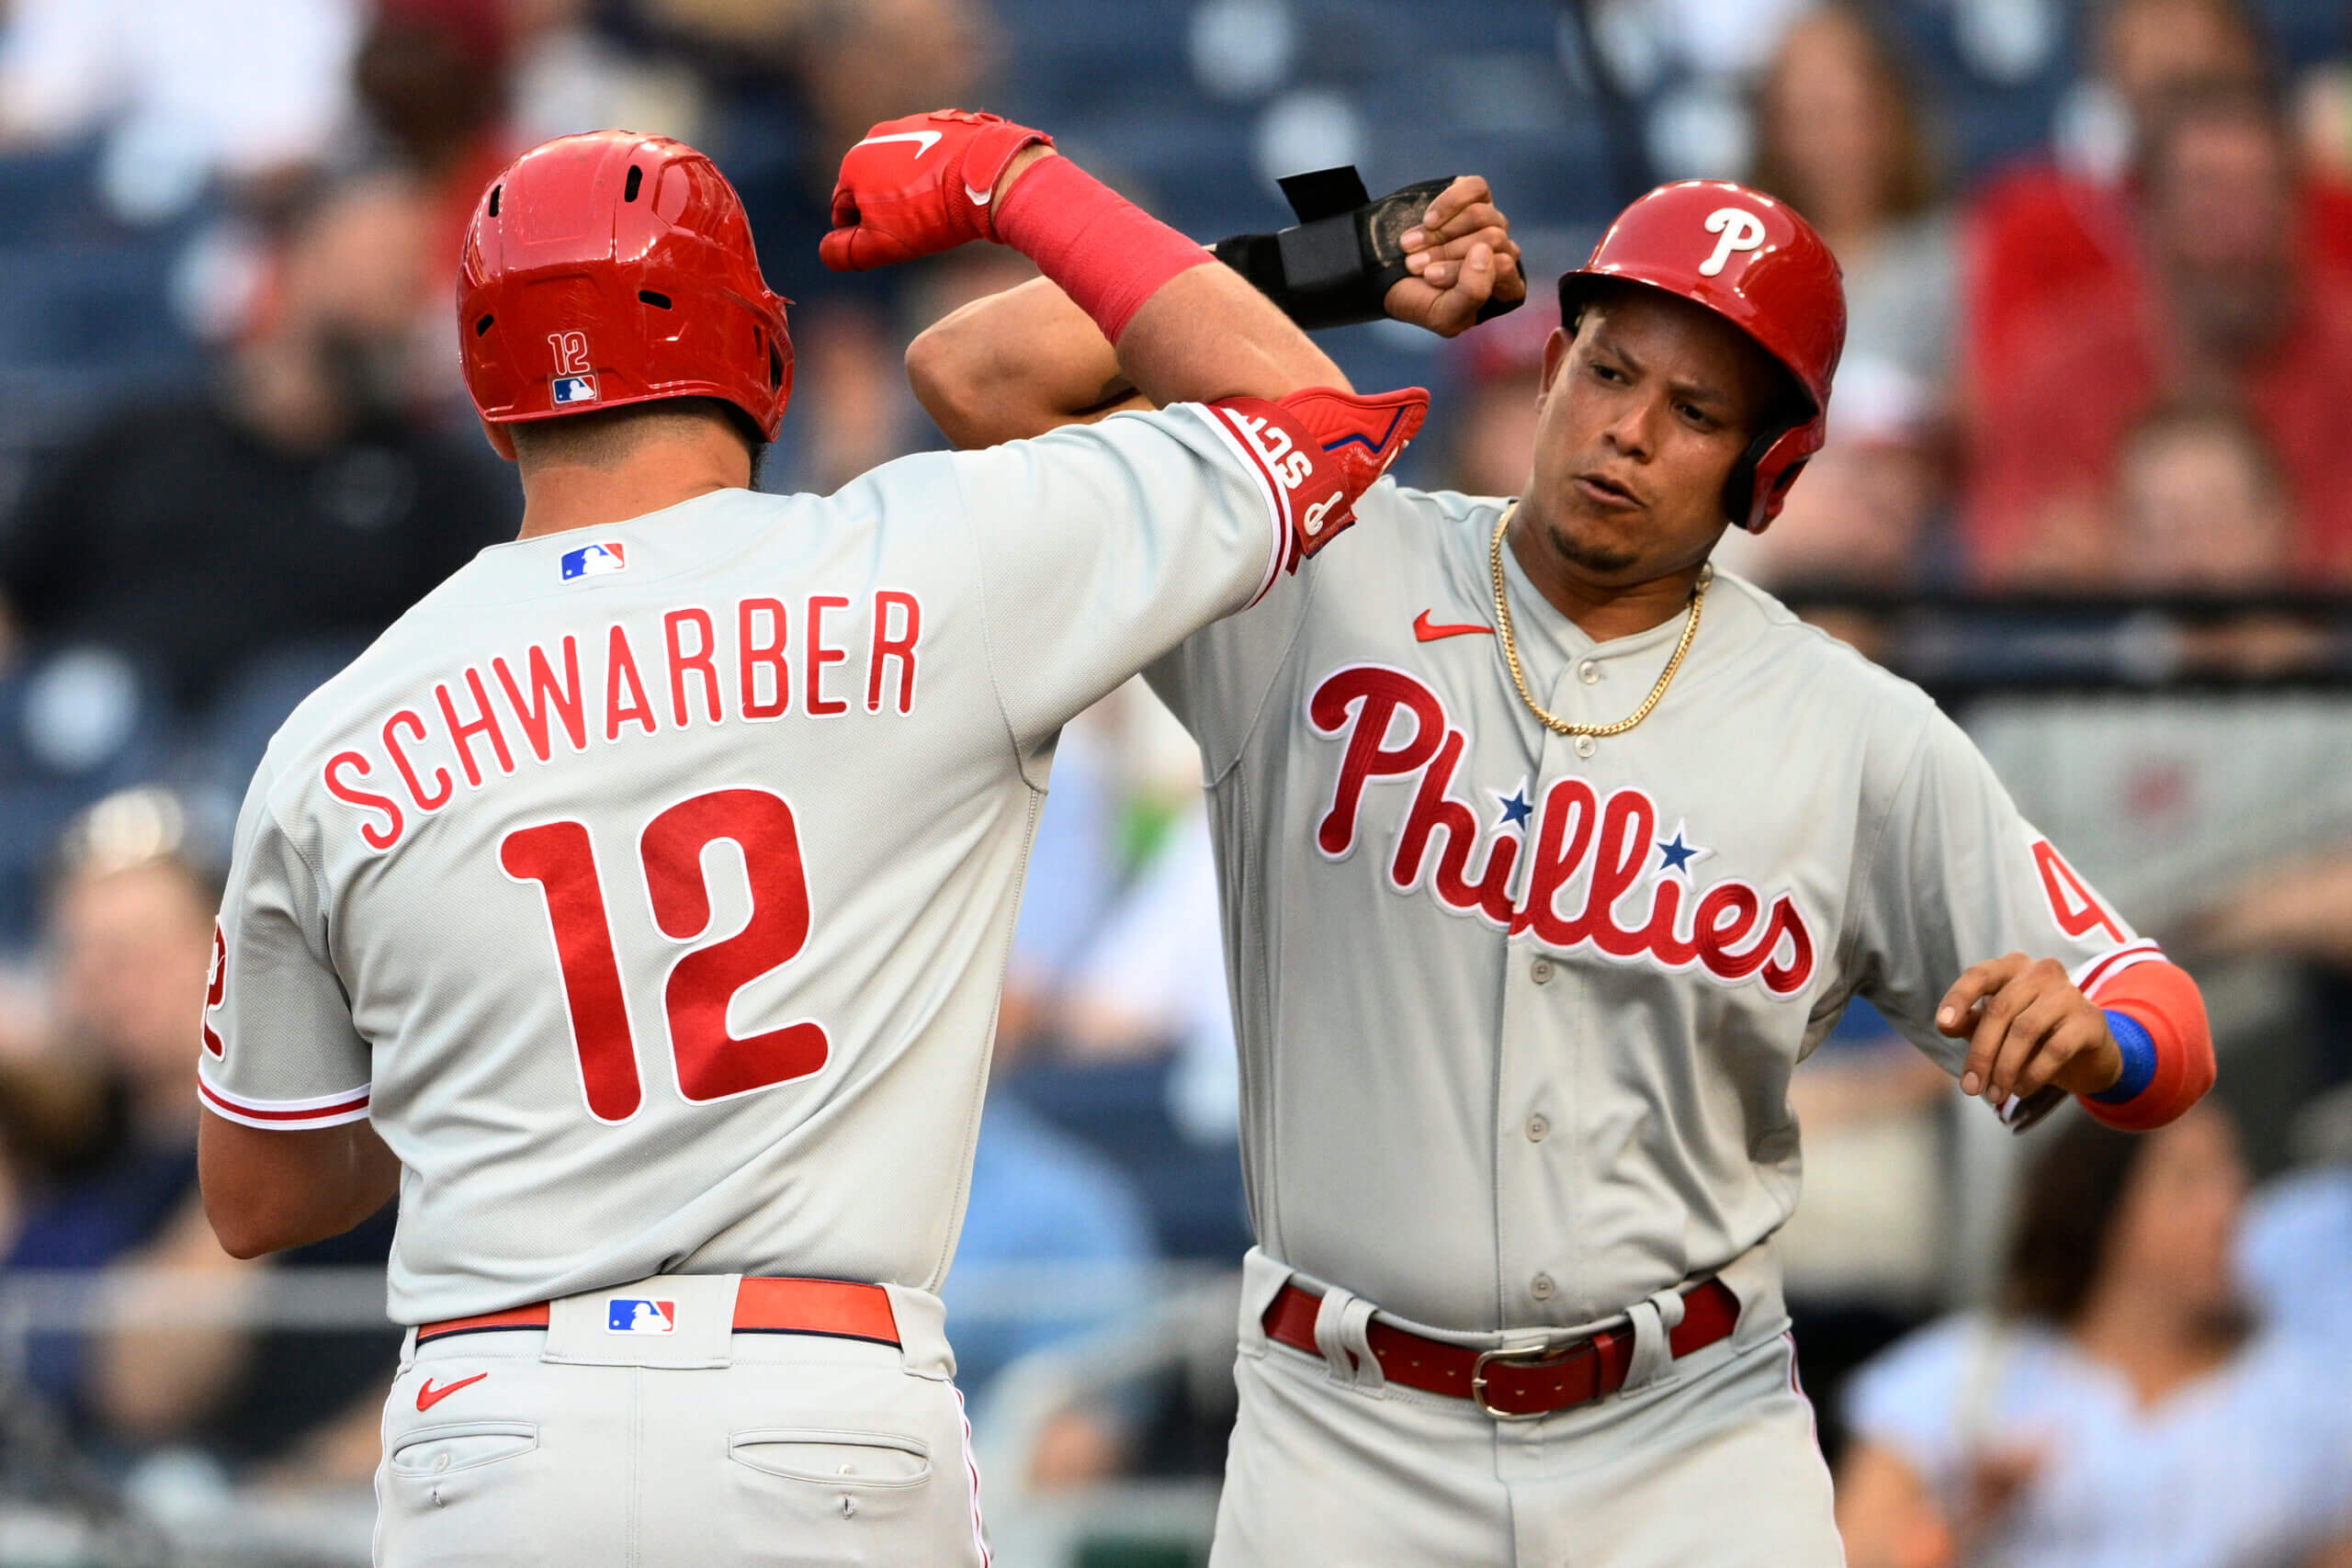 Phillies' outfielder Kyle Schwarber has officially arrived